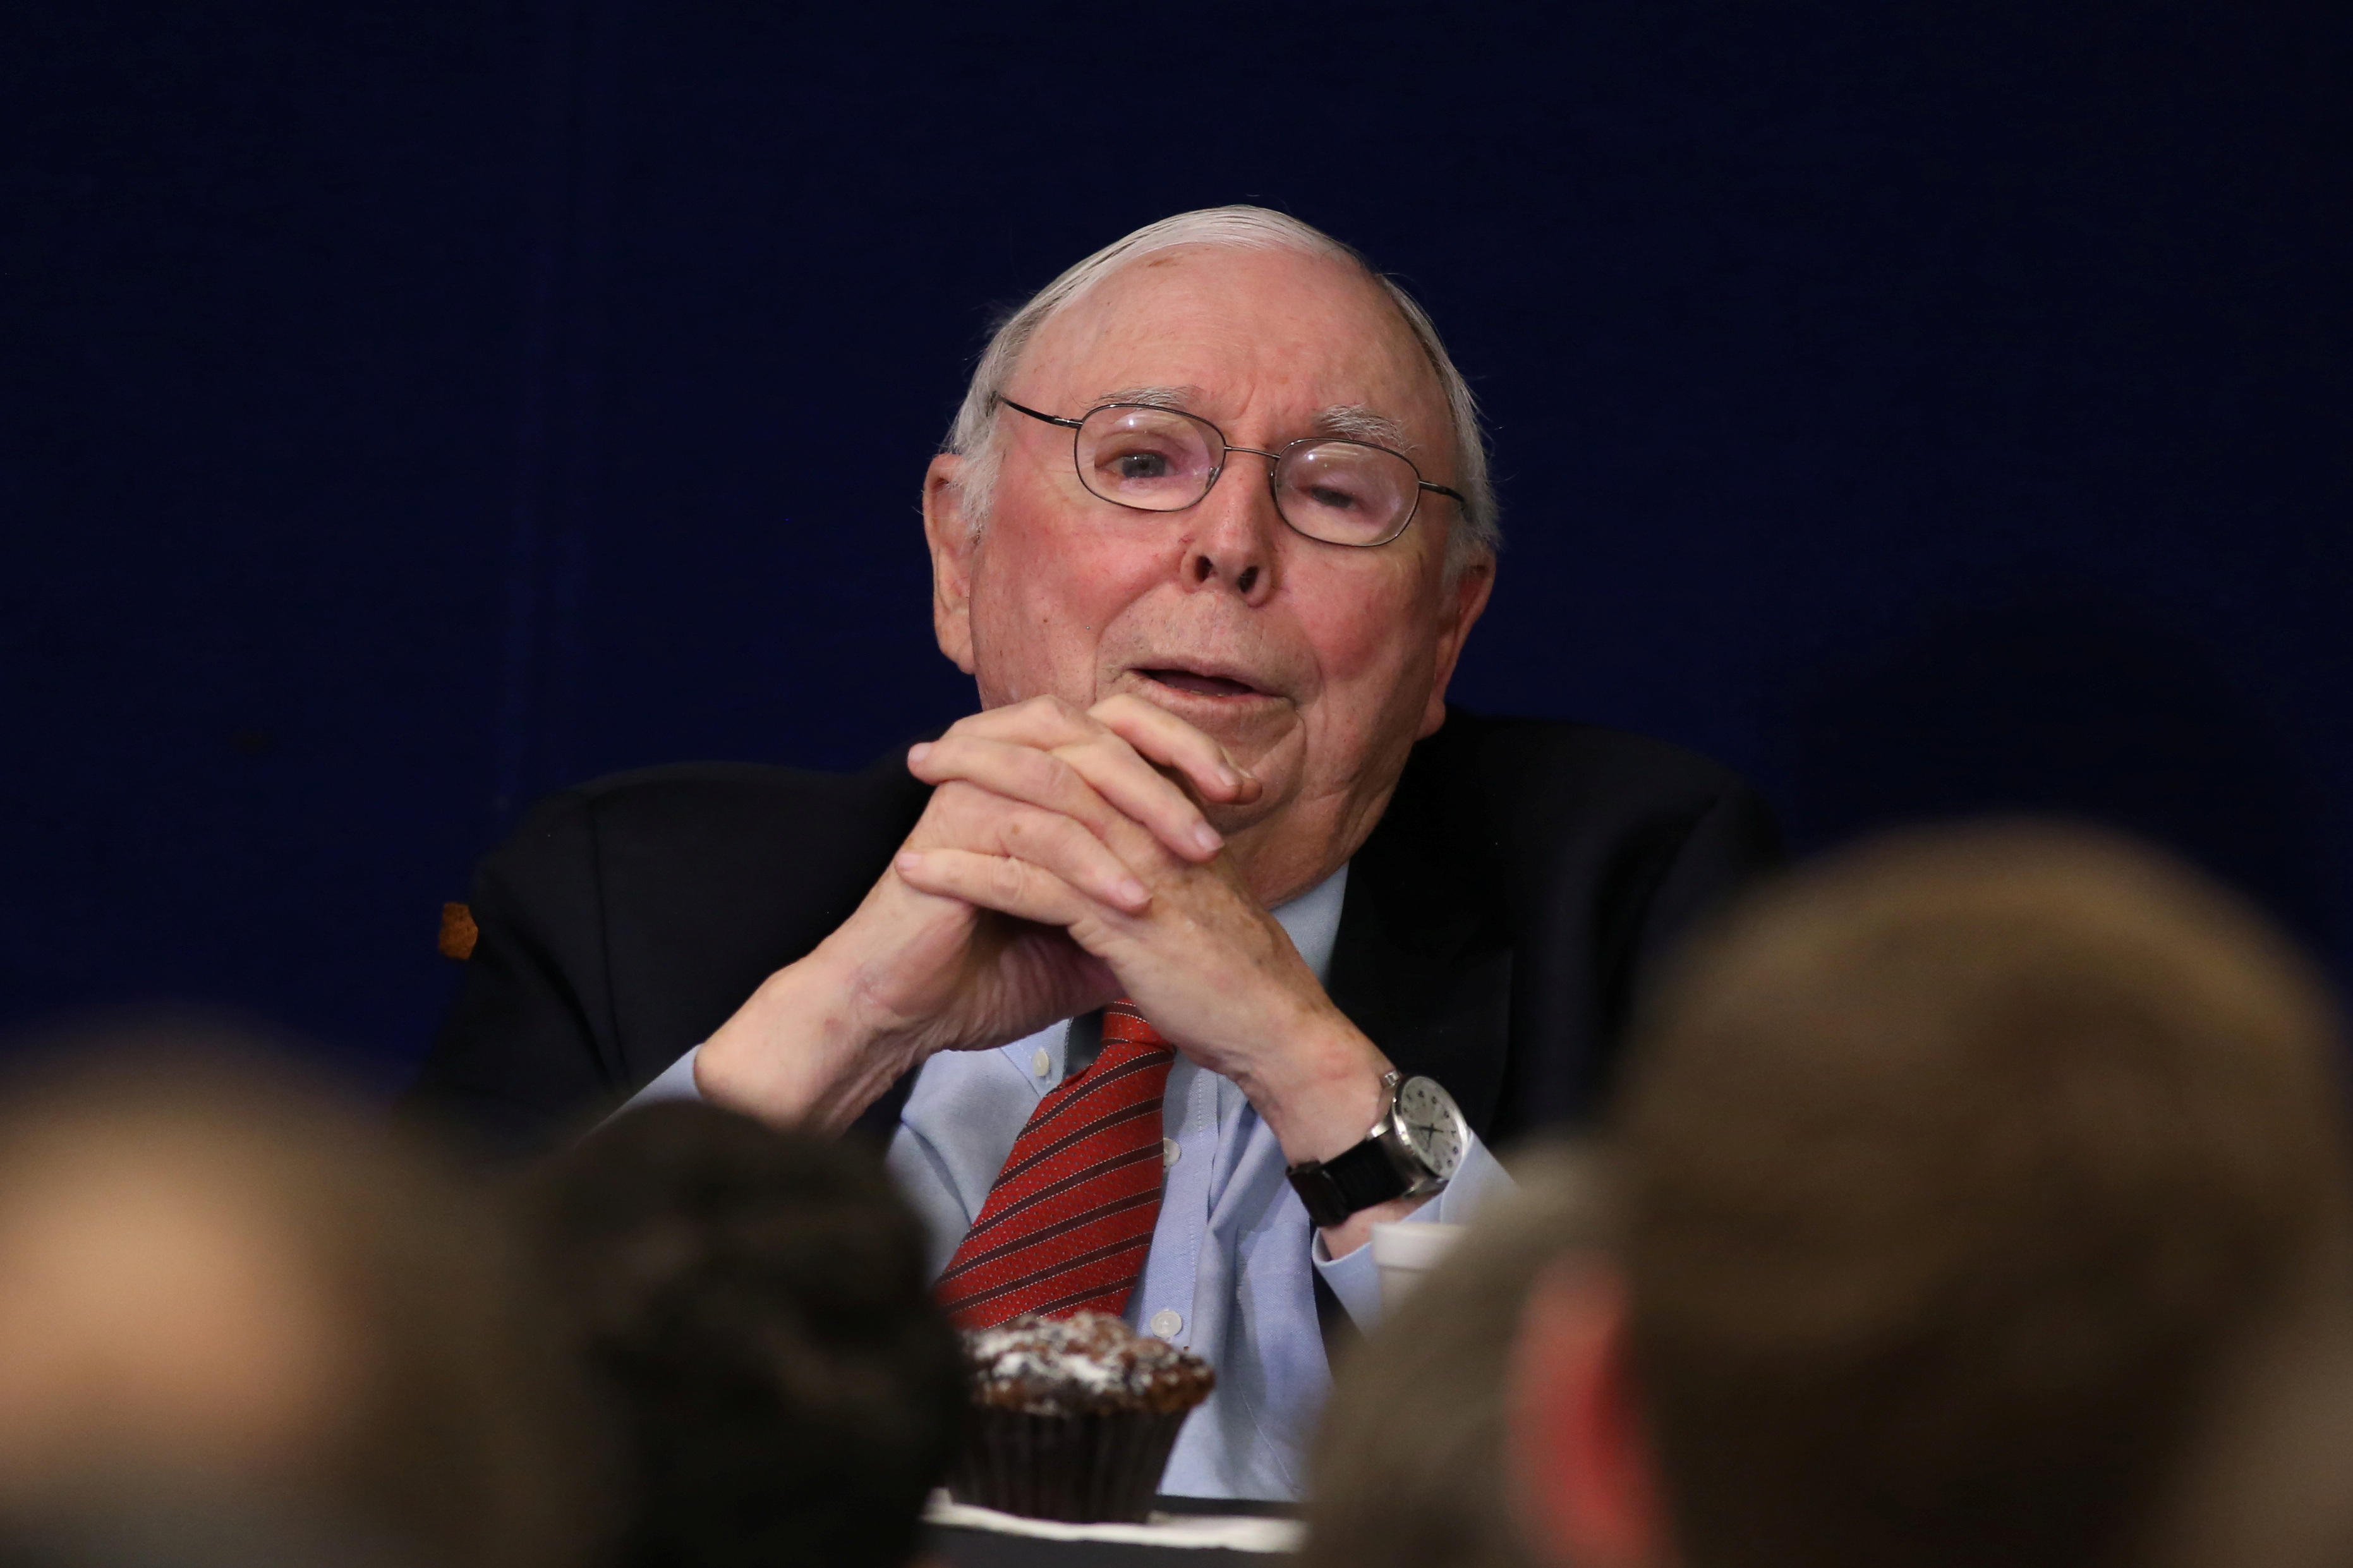 Berkshire Hathaway Inc Vice Chairman Charles Munger speaks at the Daily Journal annual meeting in Los Angeles